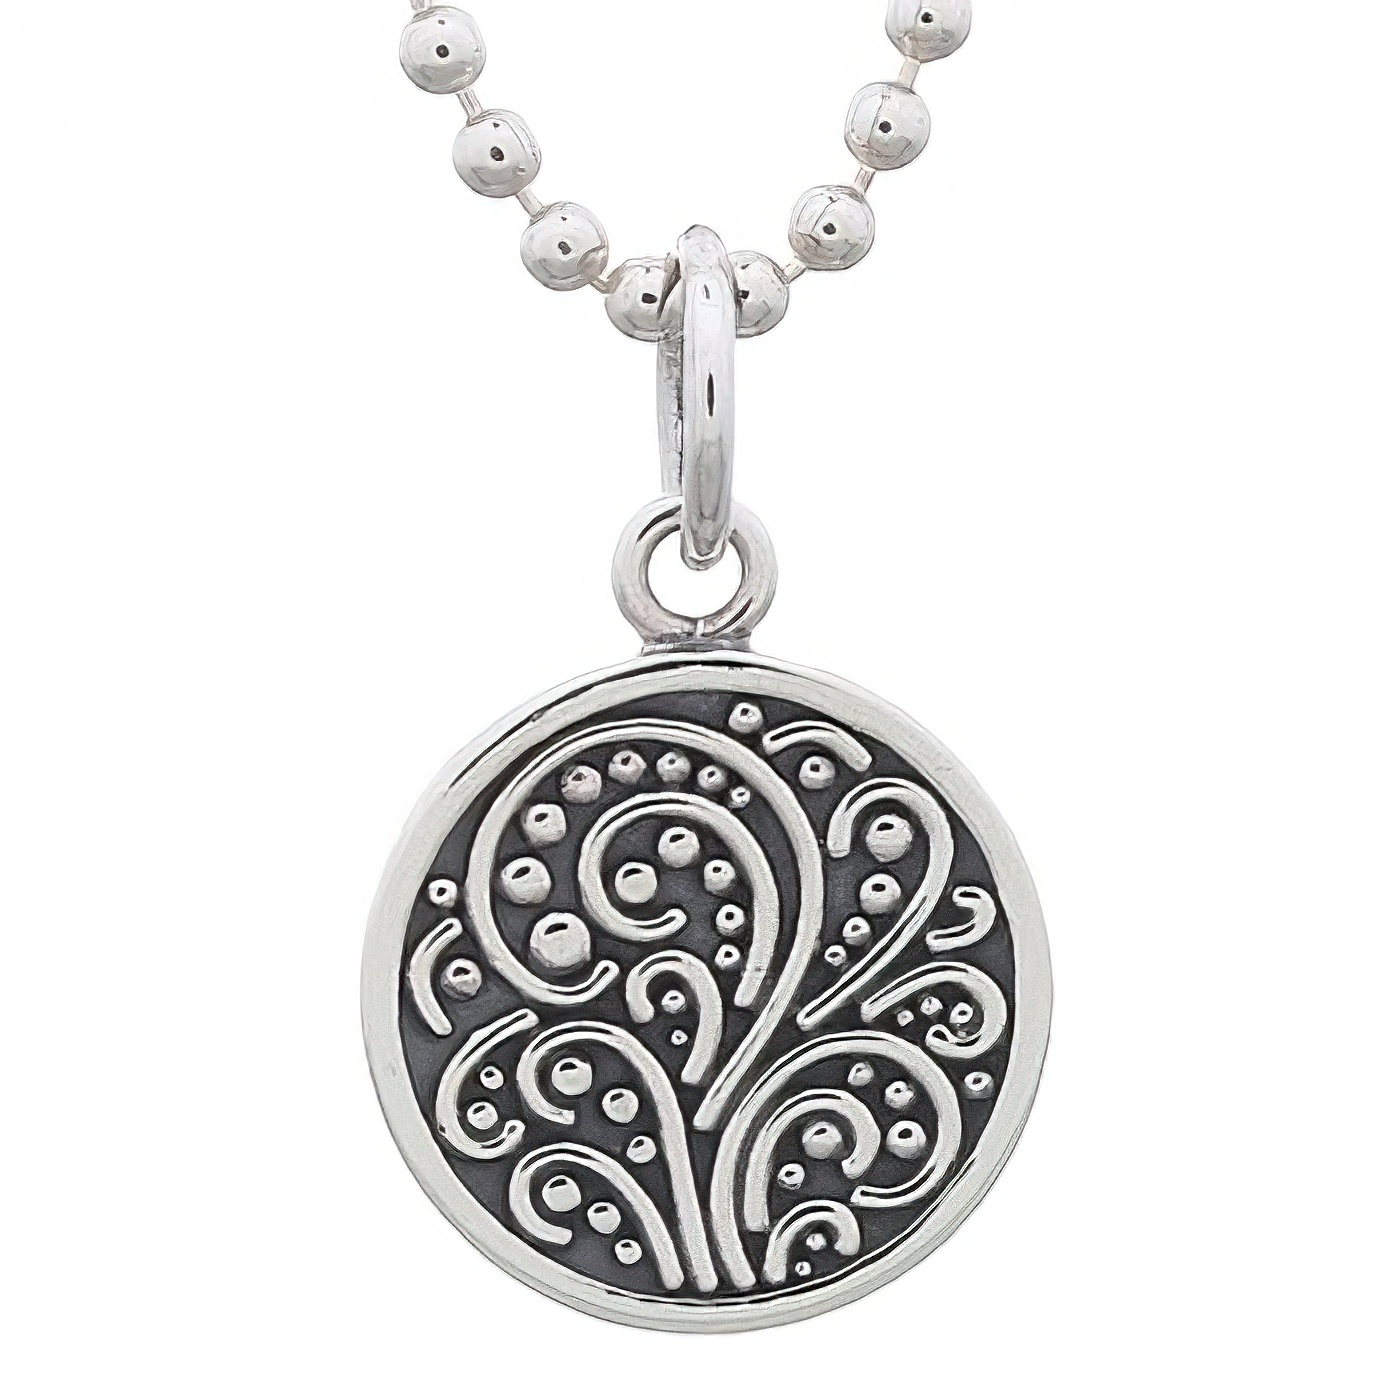 Stunning Ornamented Style Pendant 925 Sterling Silver by BeYindi 